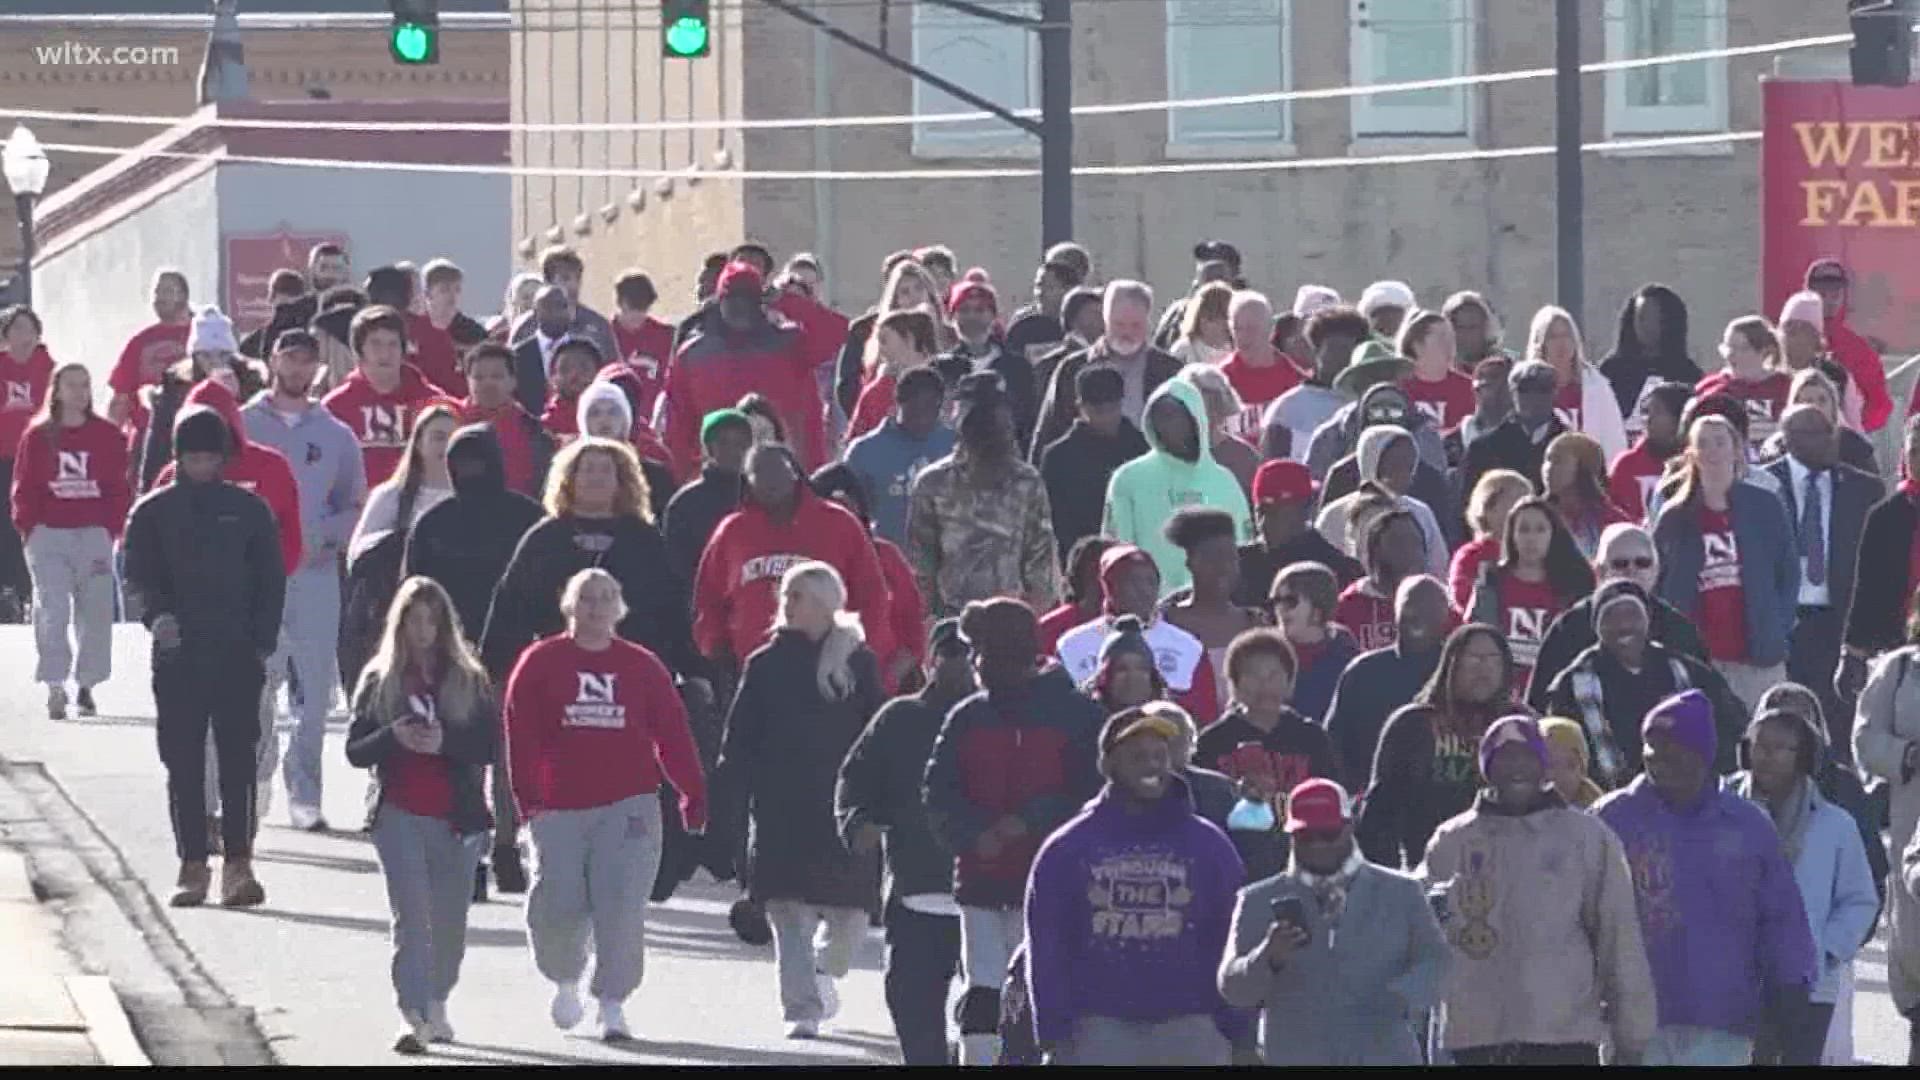 The Town of Newberry held their 22nd annual Martin Luther King Jr. Day celebration with an almost 1 mile march and a church service.